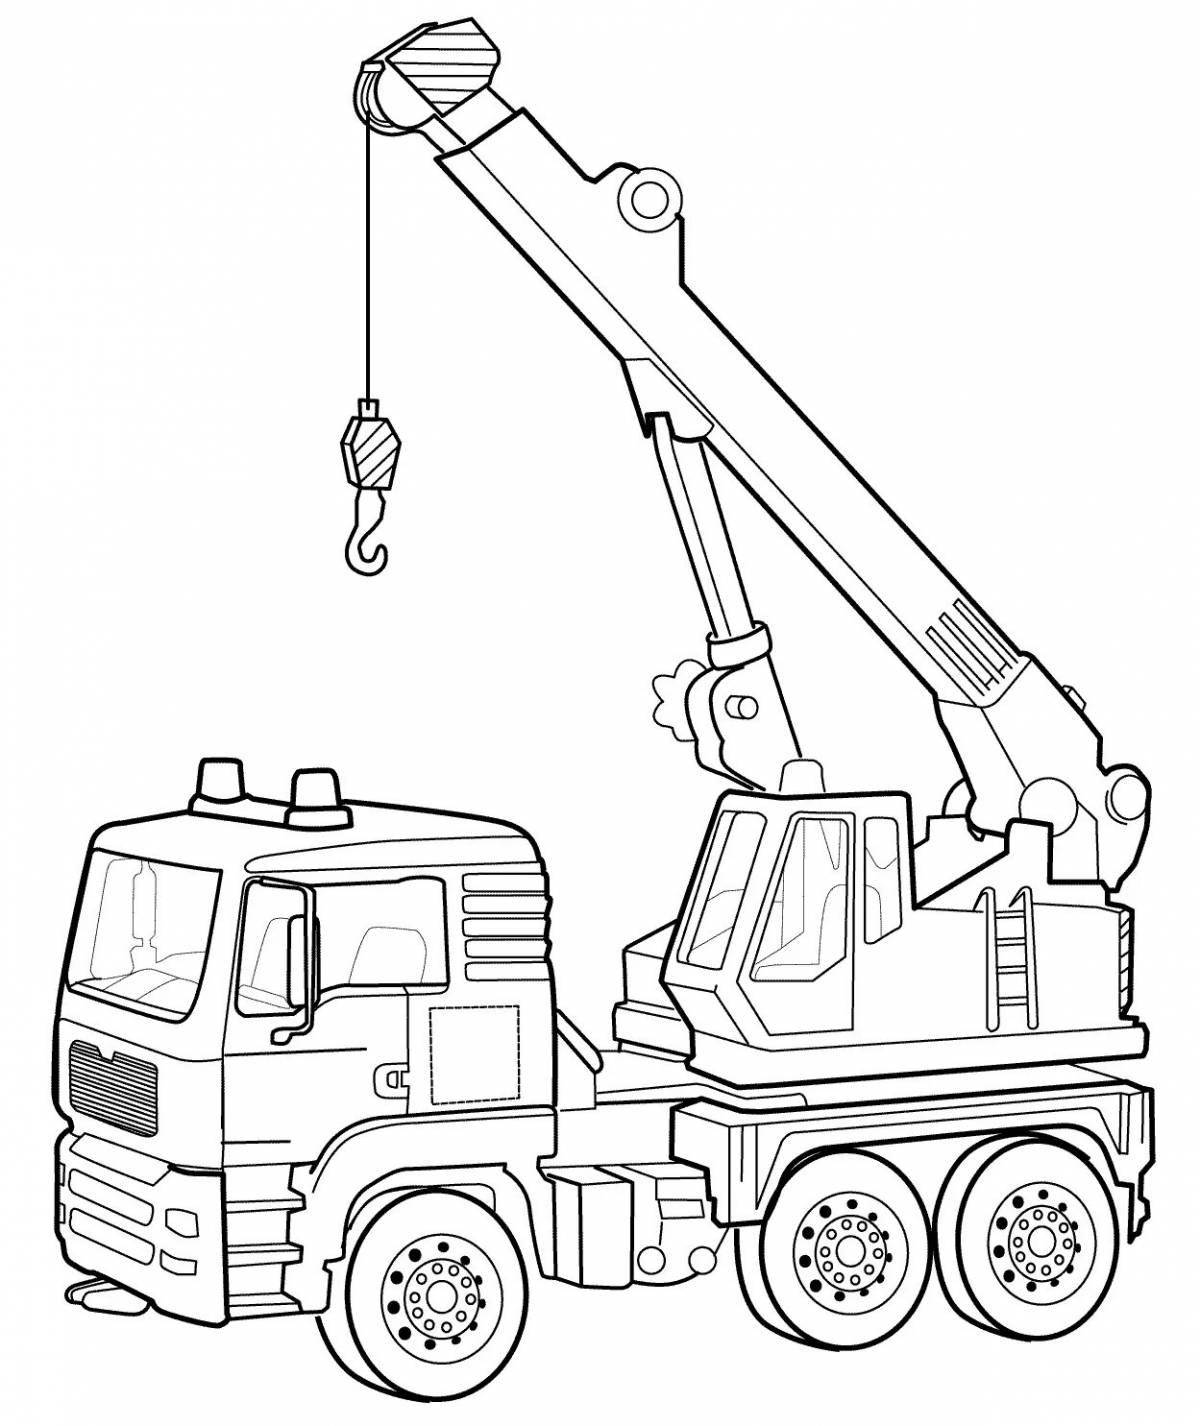 Playful crane coloring page for 4-5 year olds